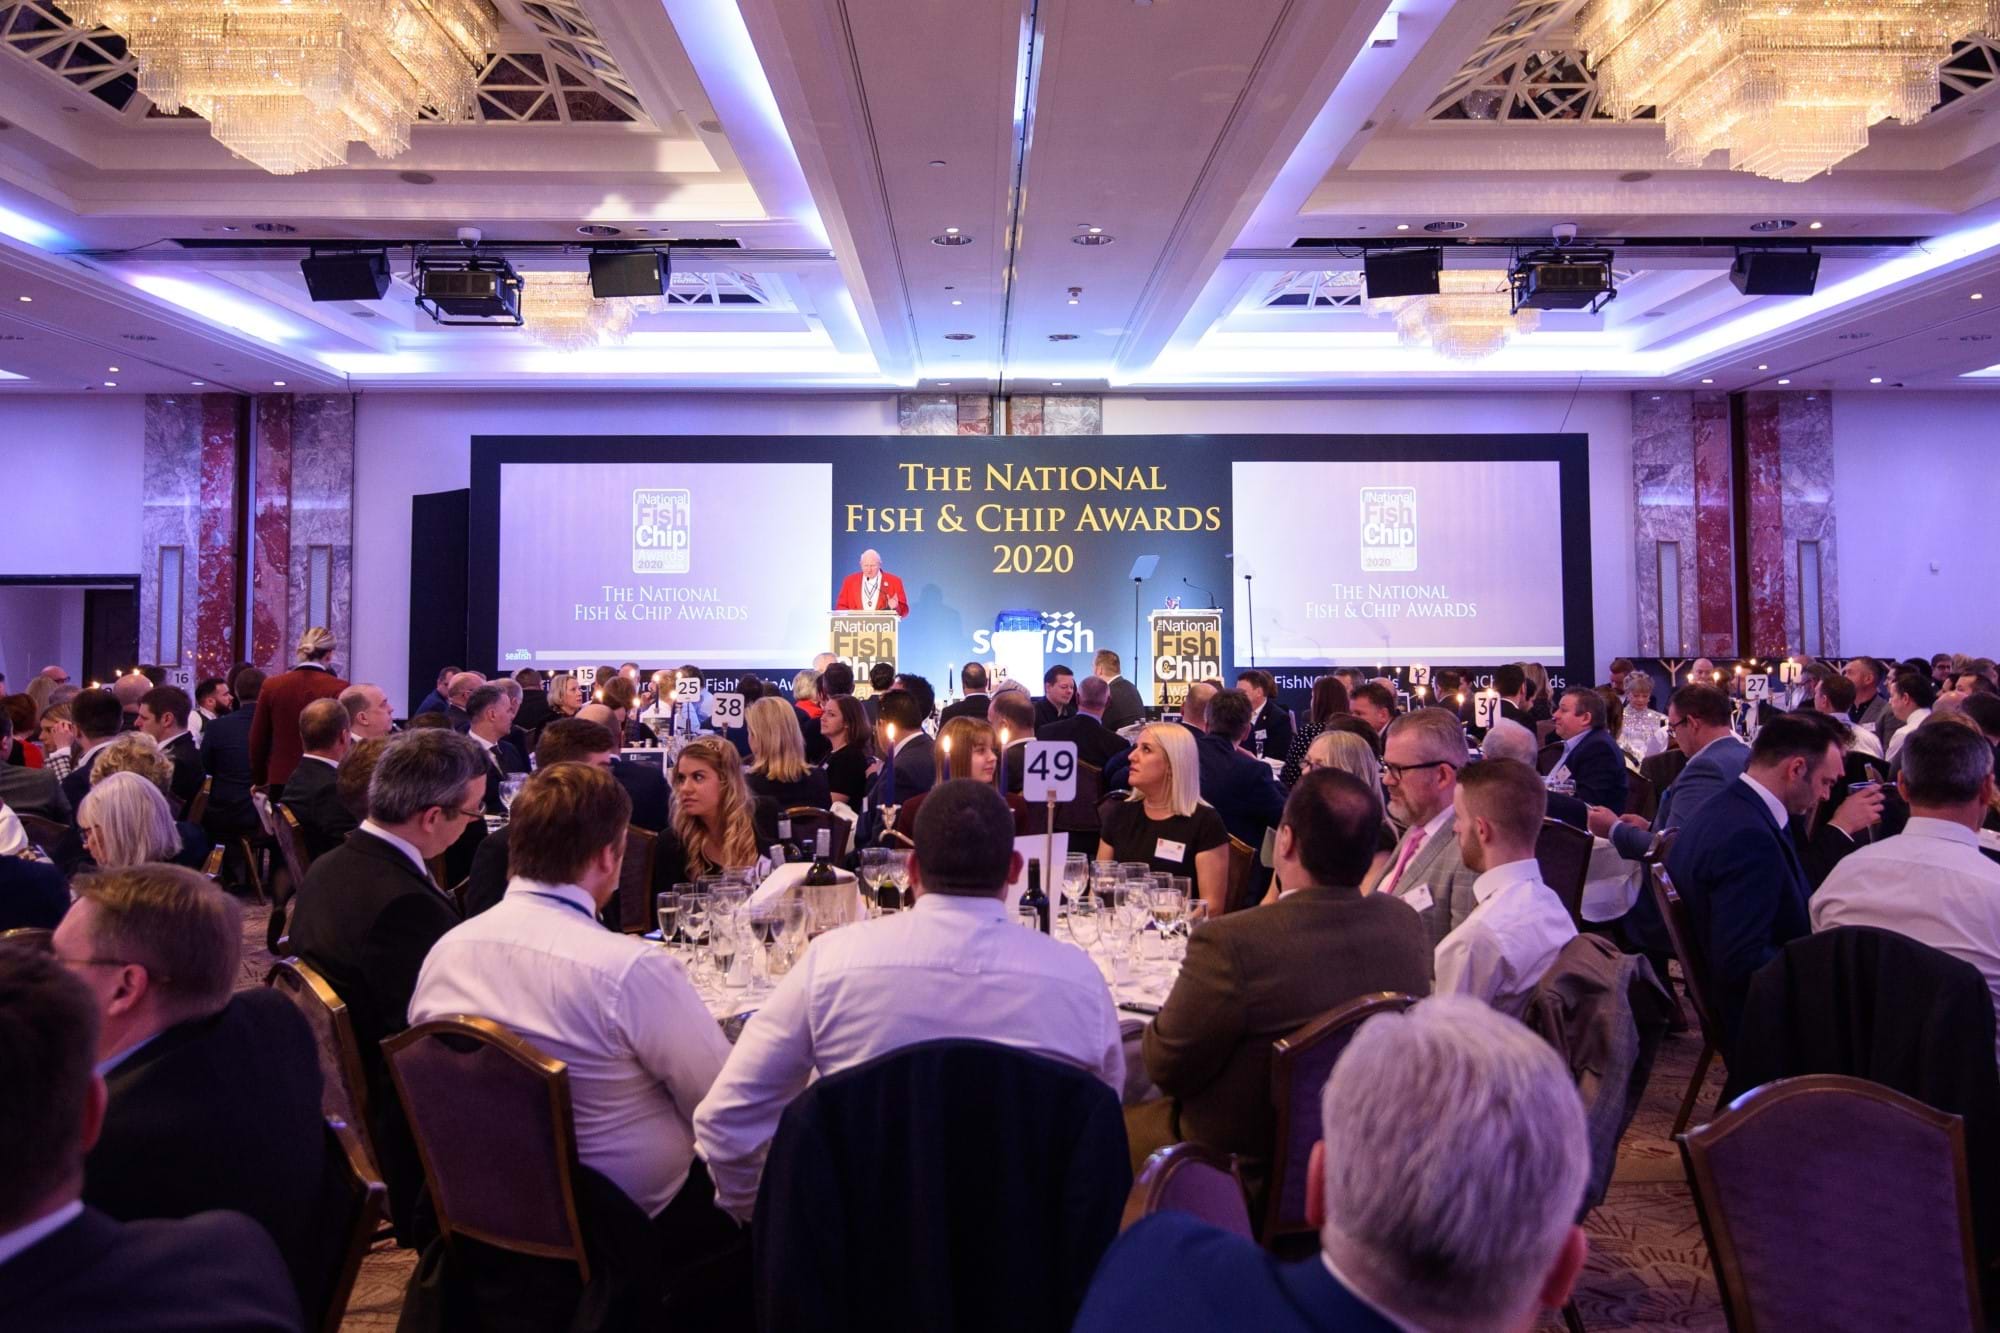 Guests in attendance at the National Fish and Chip Awards 2020